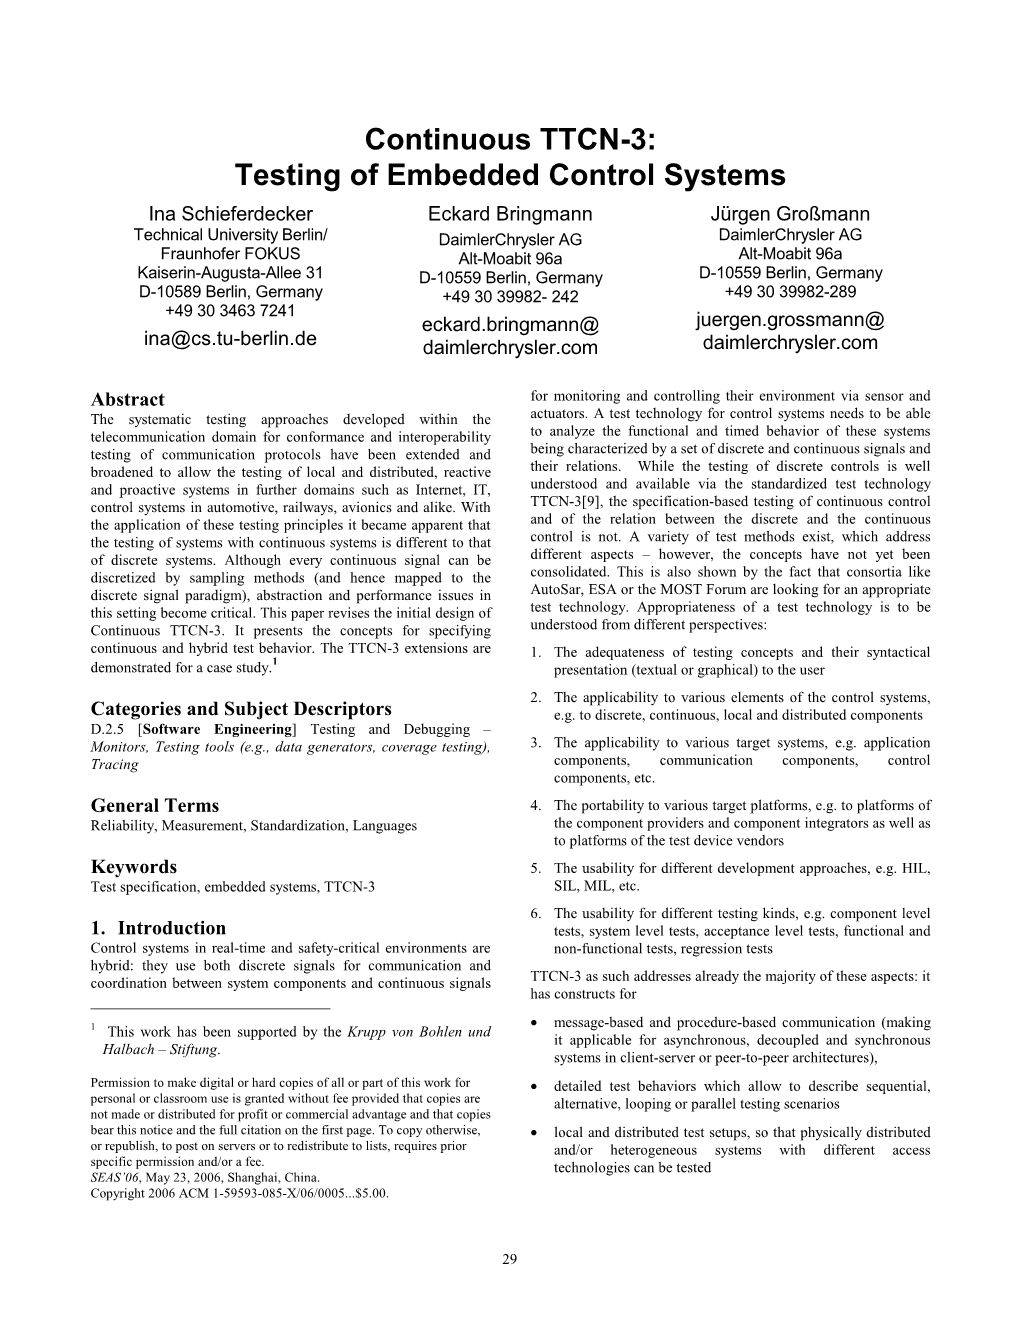 Continuous TTCN-3: Testing of Embedded Control Systems